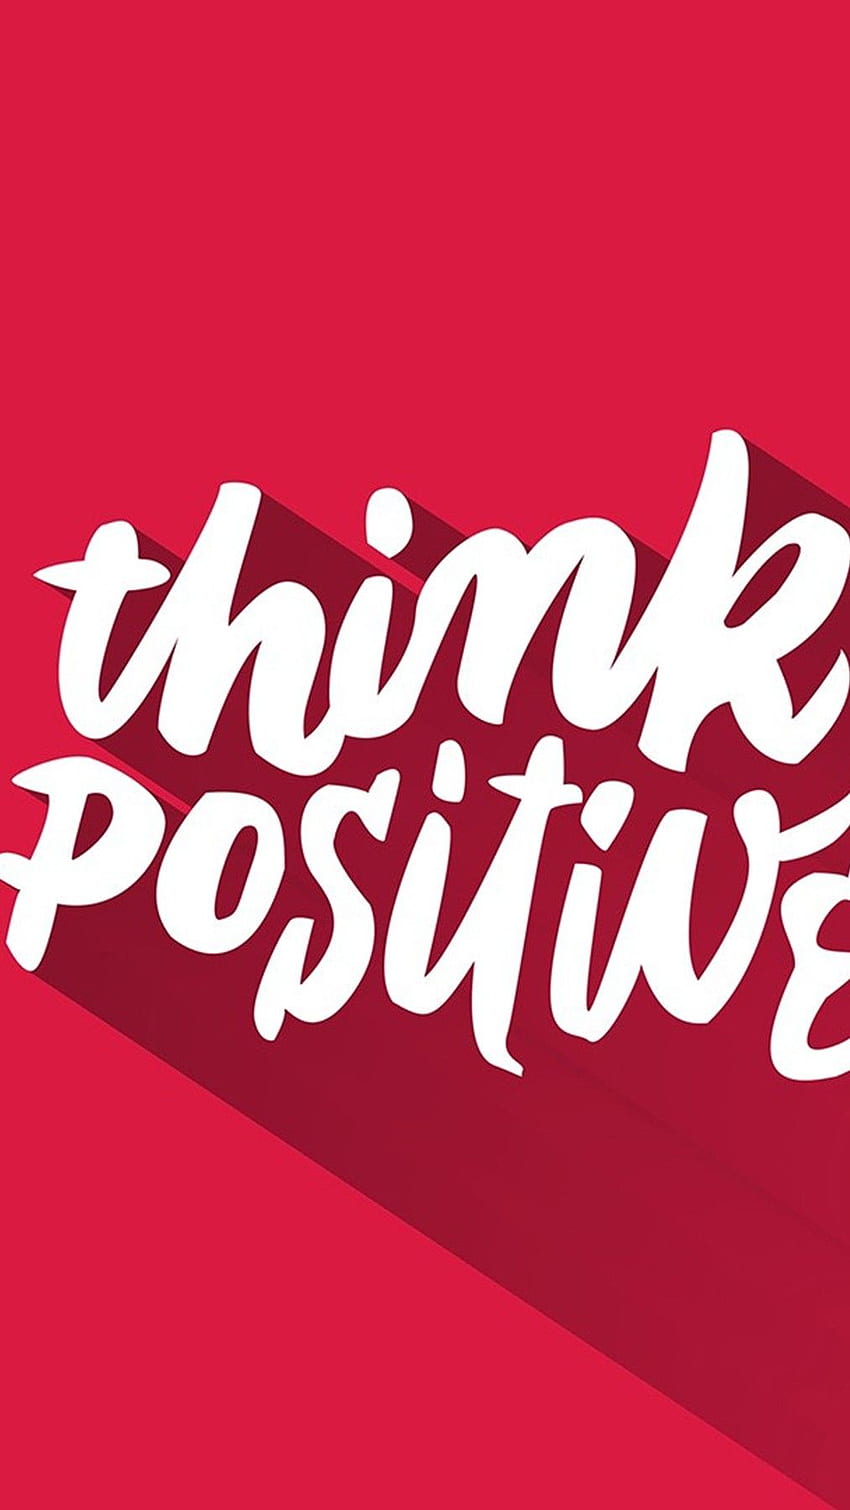 Think positive motivational quotes mobile - The Mobile HD phone wallpaper